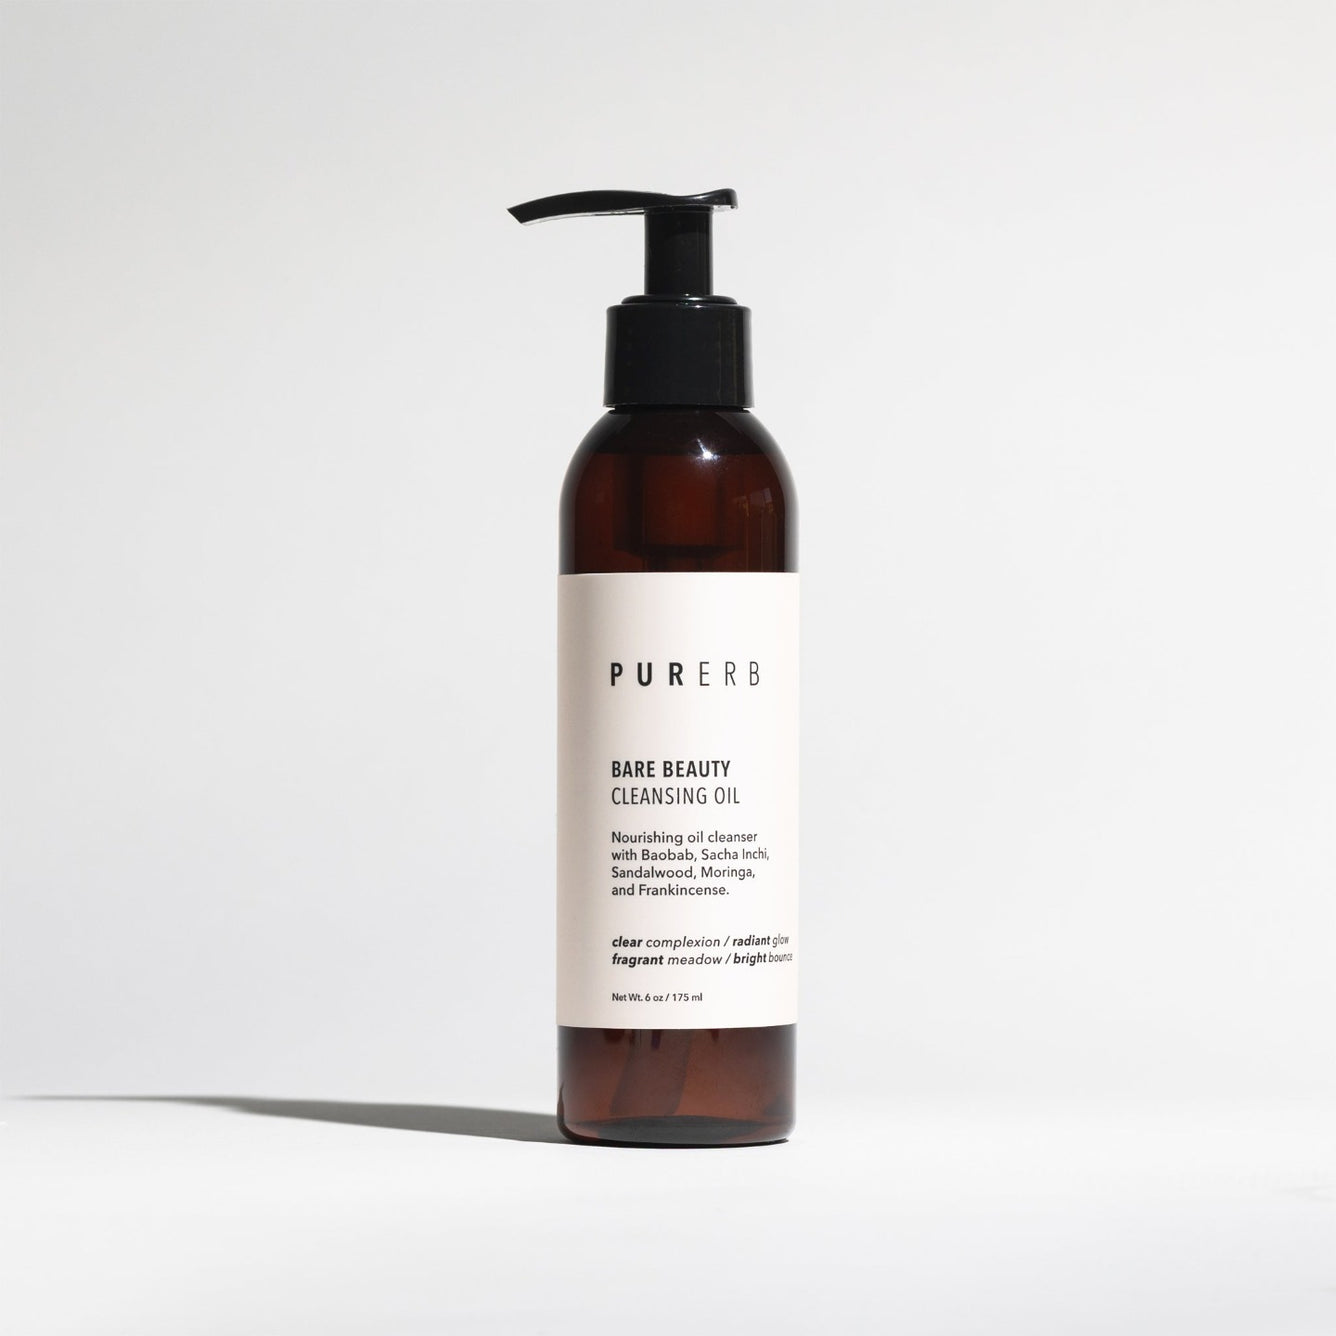 Youthful Glow Cleansing Oil - Bare Beauty's nourishing rinse-off oil with Baobab, Sacha Inchi, Sandalwood, Moringa, and Frankincense oils. Purifies, balances oil production, and nourishes for vibrant and supple skin.